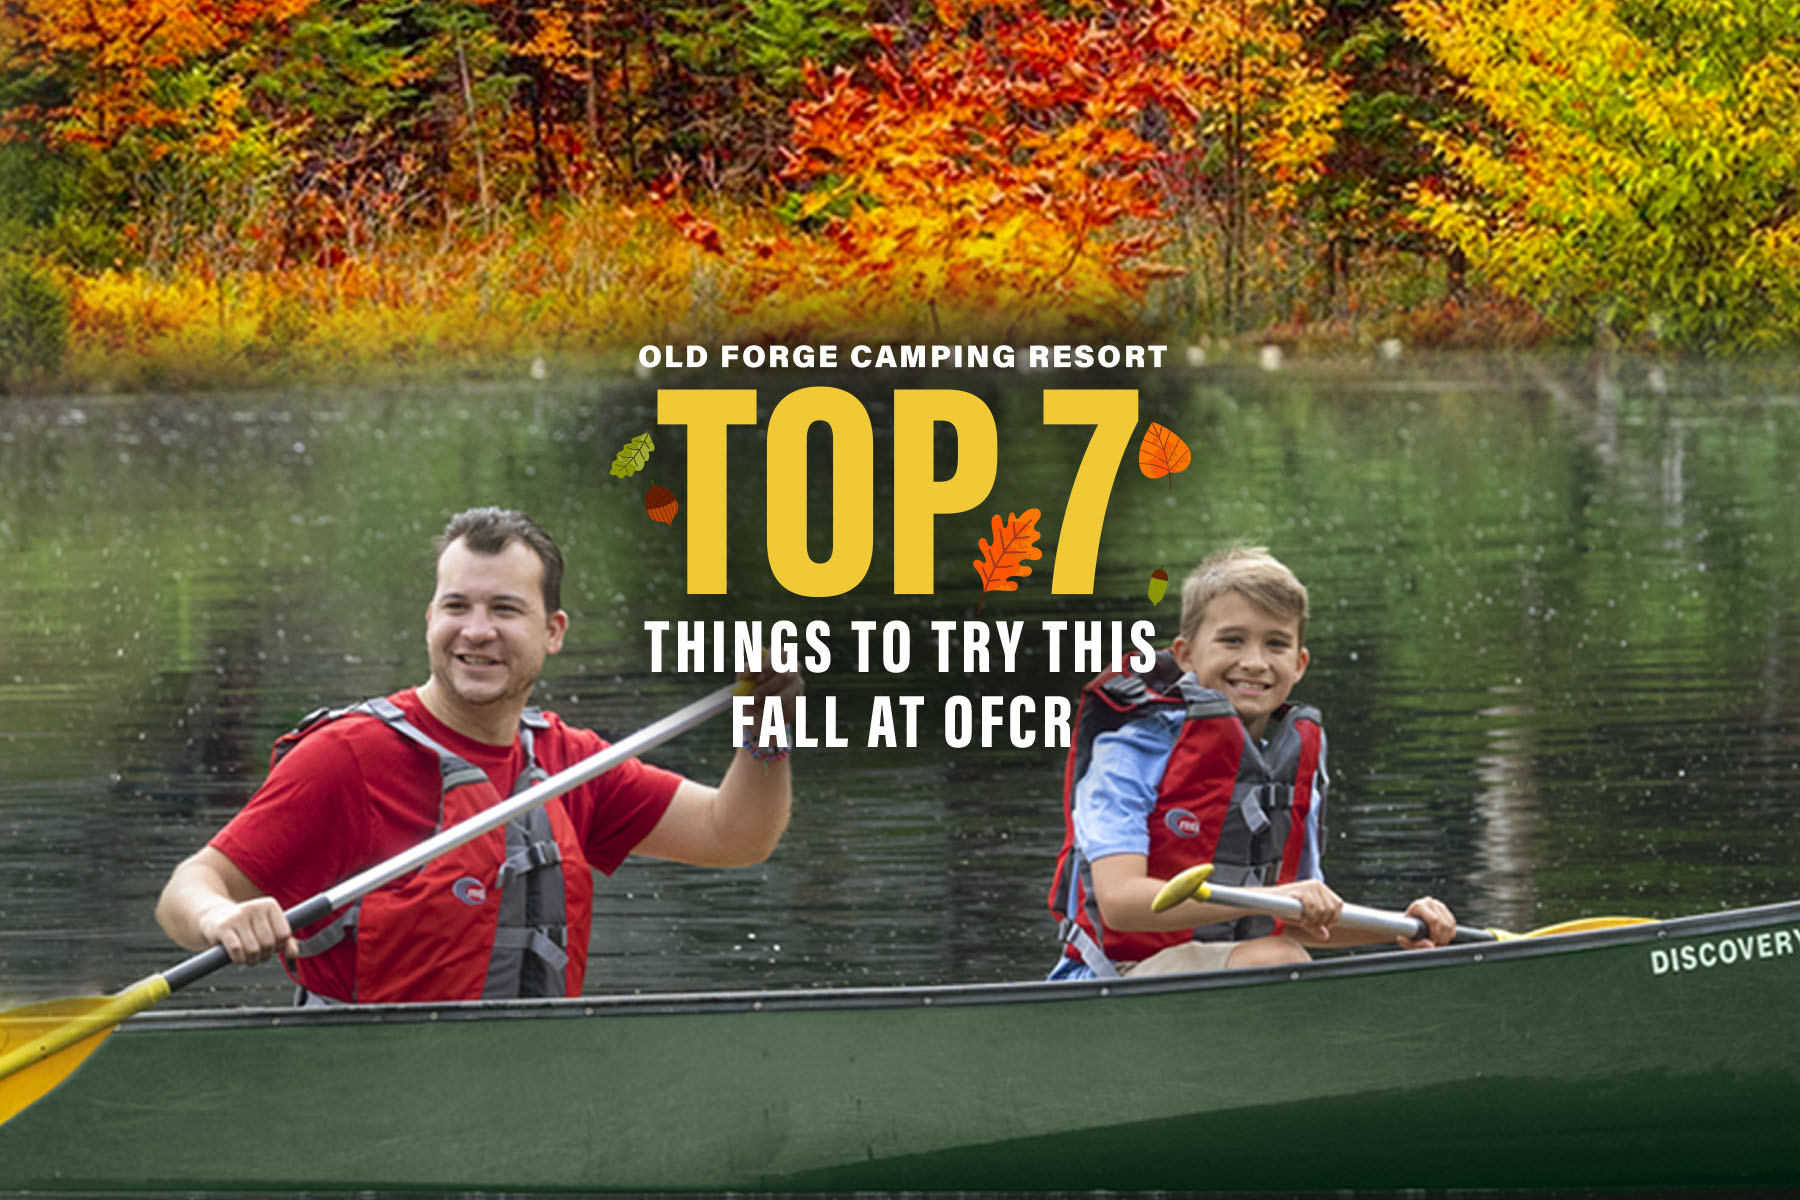 Top 7 Fall Things to Try at Old Forge Camping Resort!